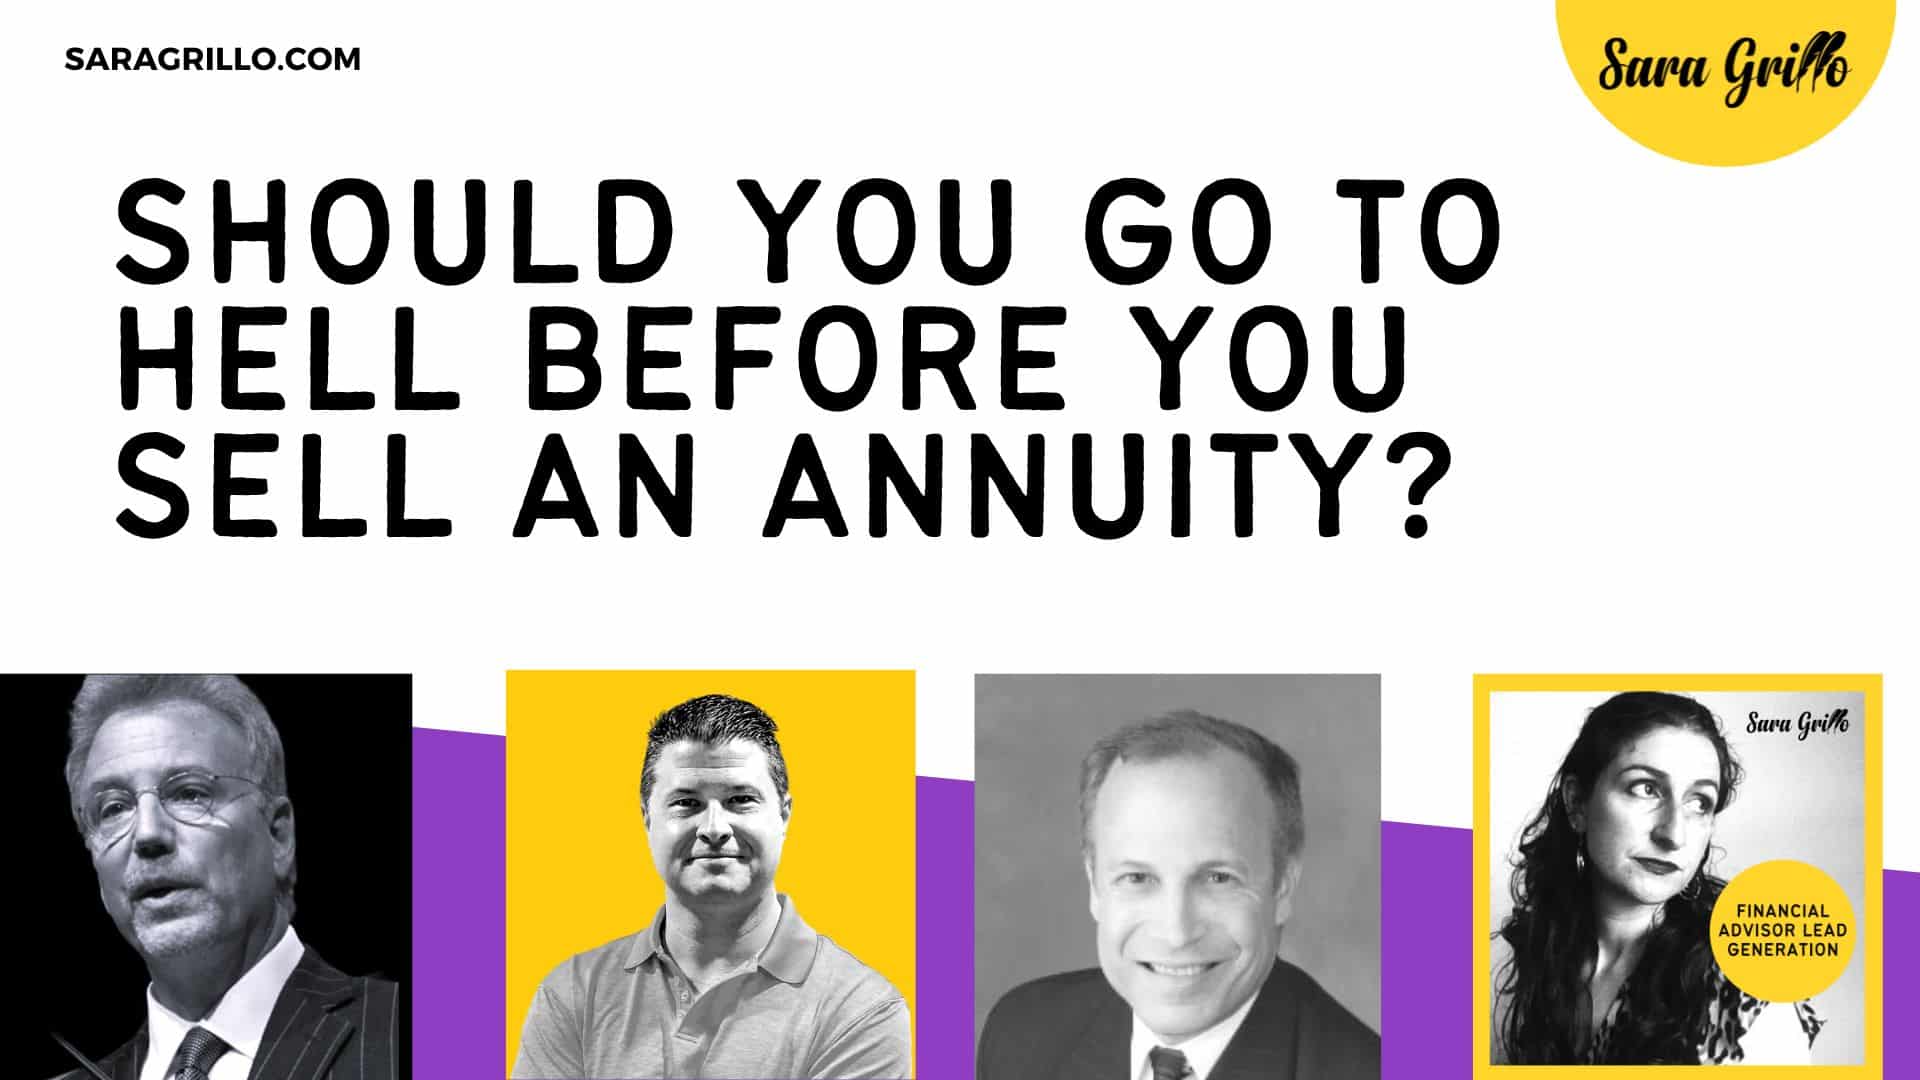 This podcast is a lively debate about selling annuities.